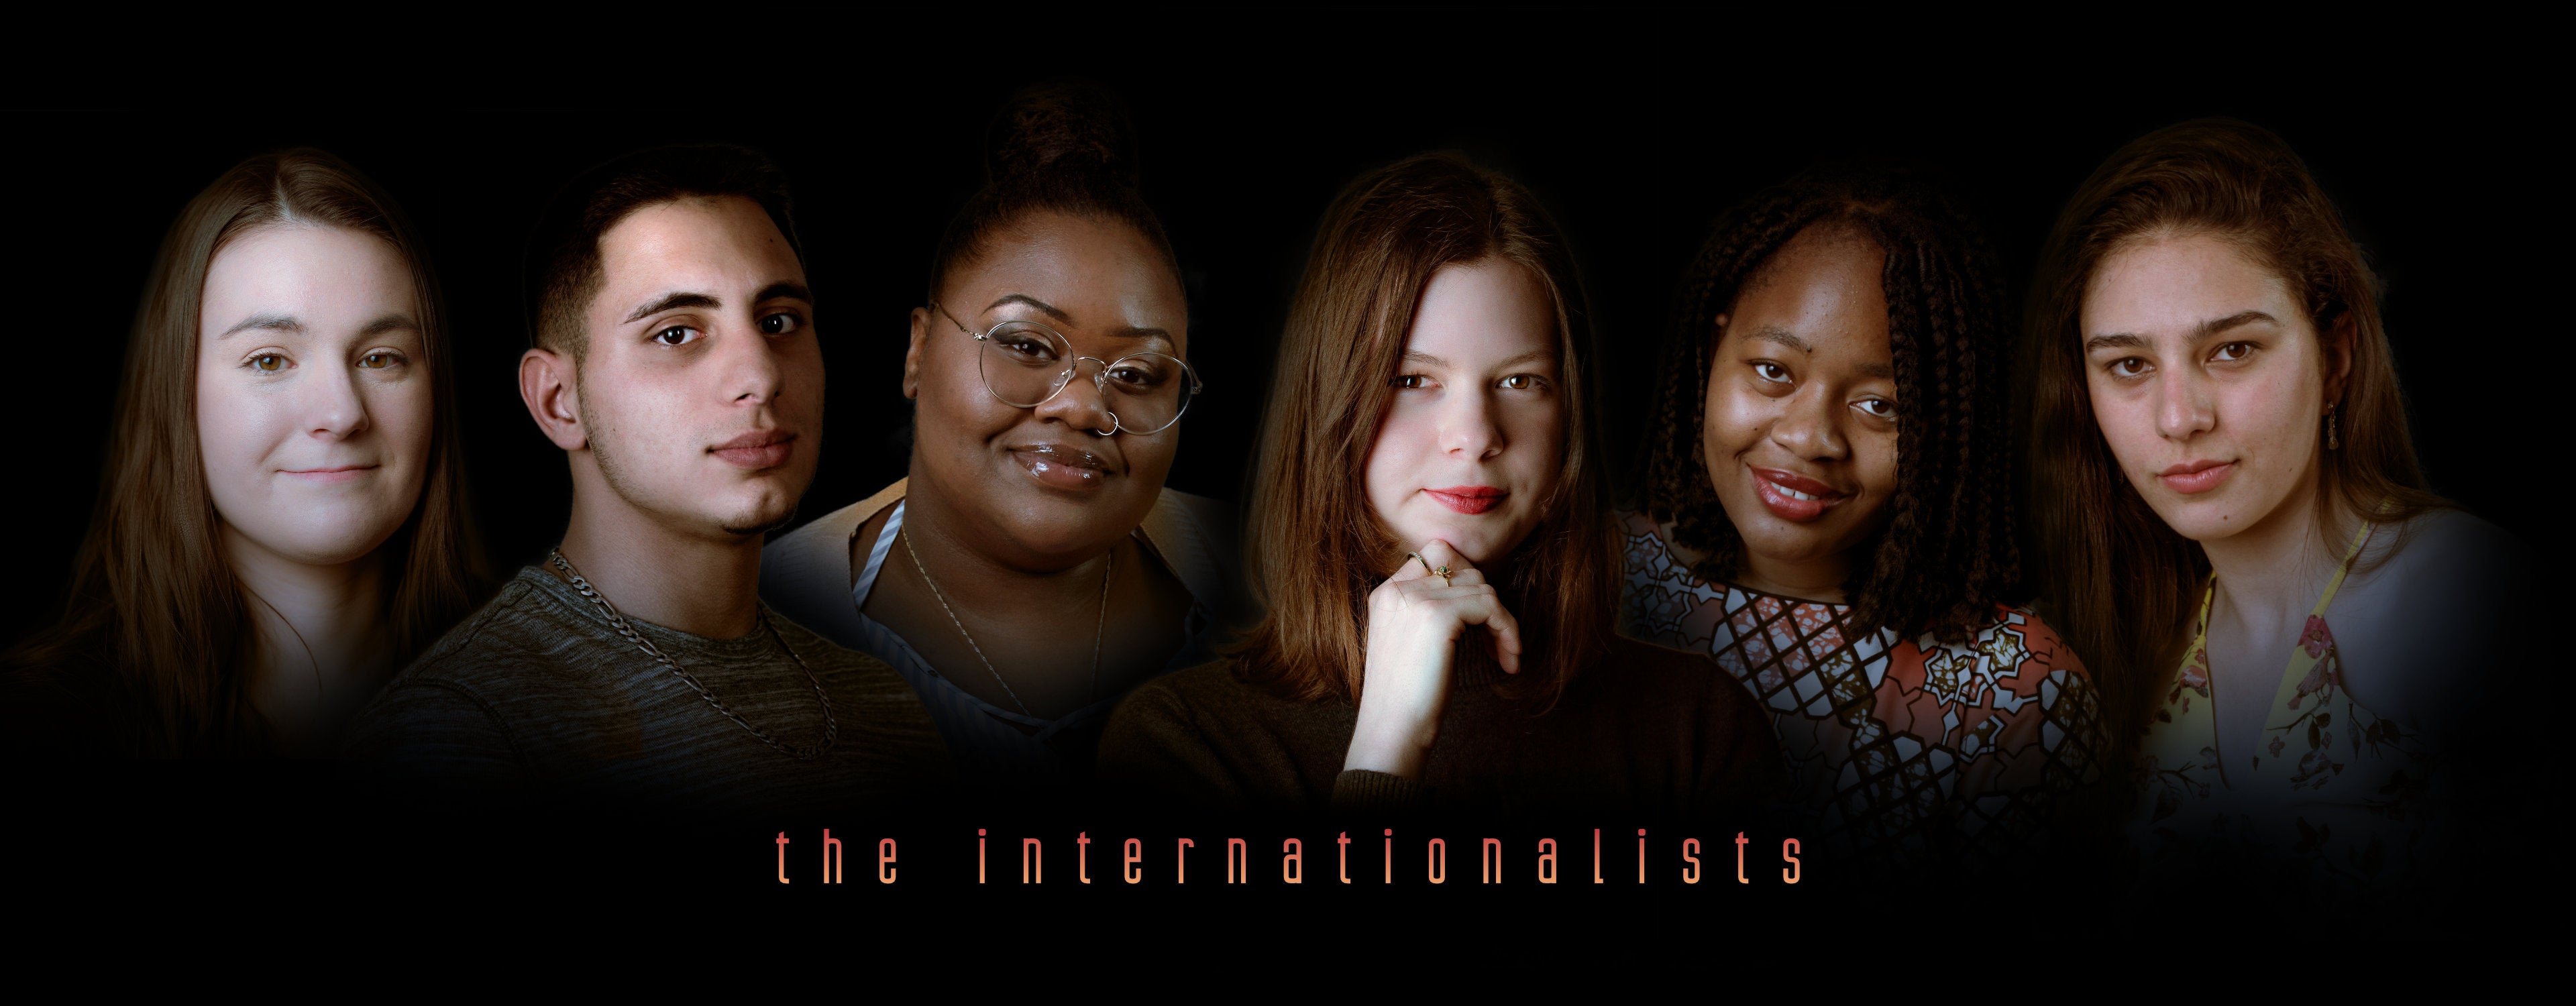 The Internationalists: link to a story about URI students who internationalize their degree at URI